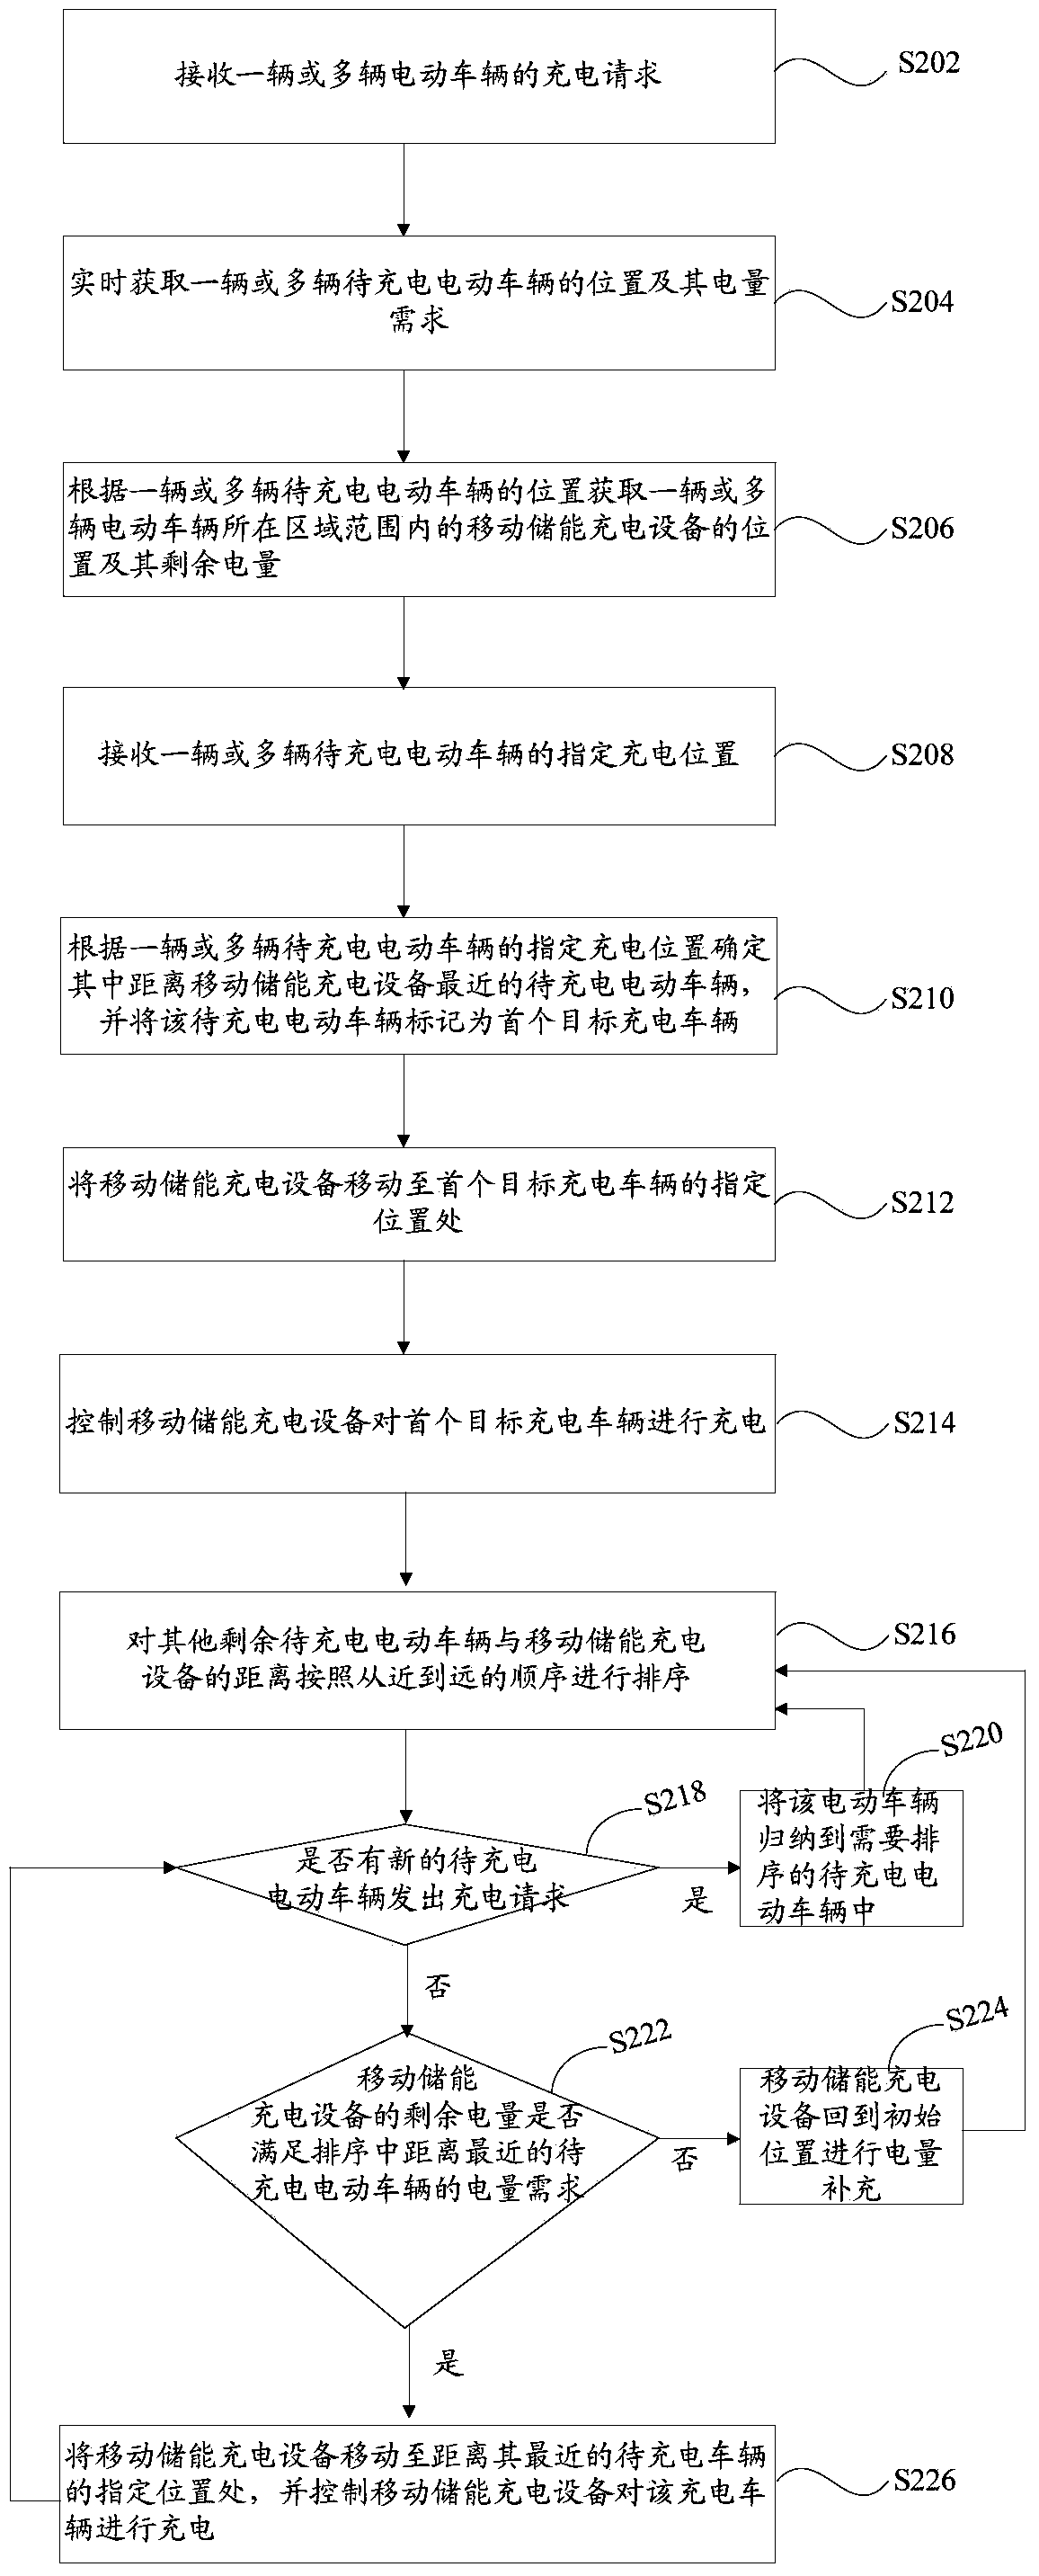 Mobile charging control method and control system for electric vehicle to be charged